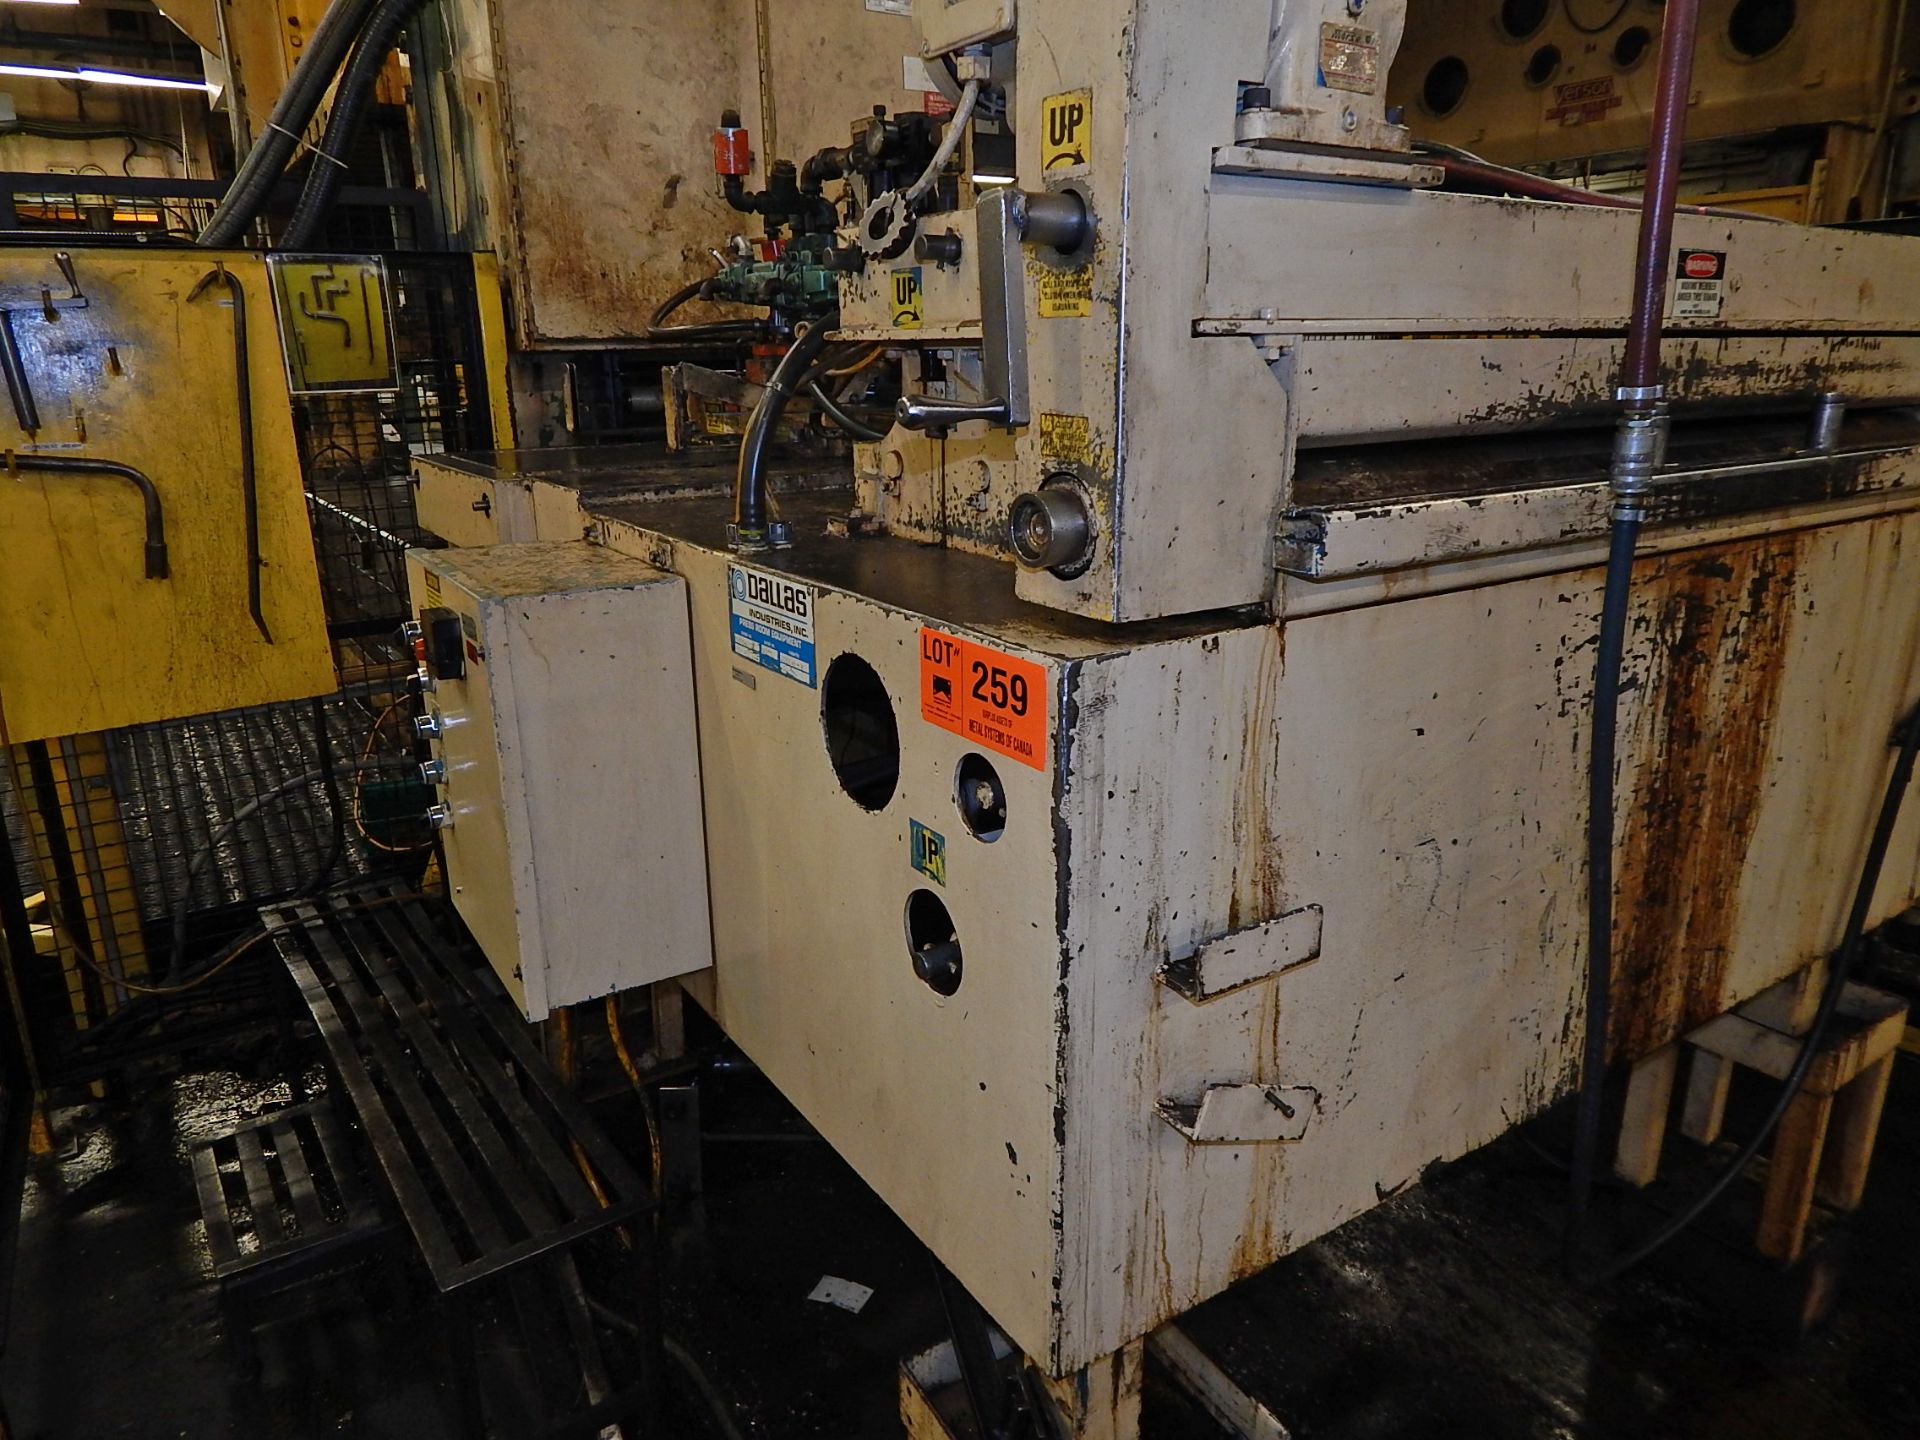 DALLAS INDUSTRIES 2D325 48" X 12" SERVO FEEDER S/N: 18231 (CI) - RIGGING FEE FOR LOT #259 - NATIONAL - Image 3 of 5